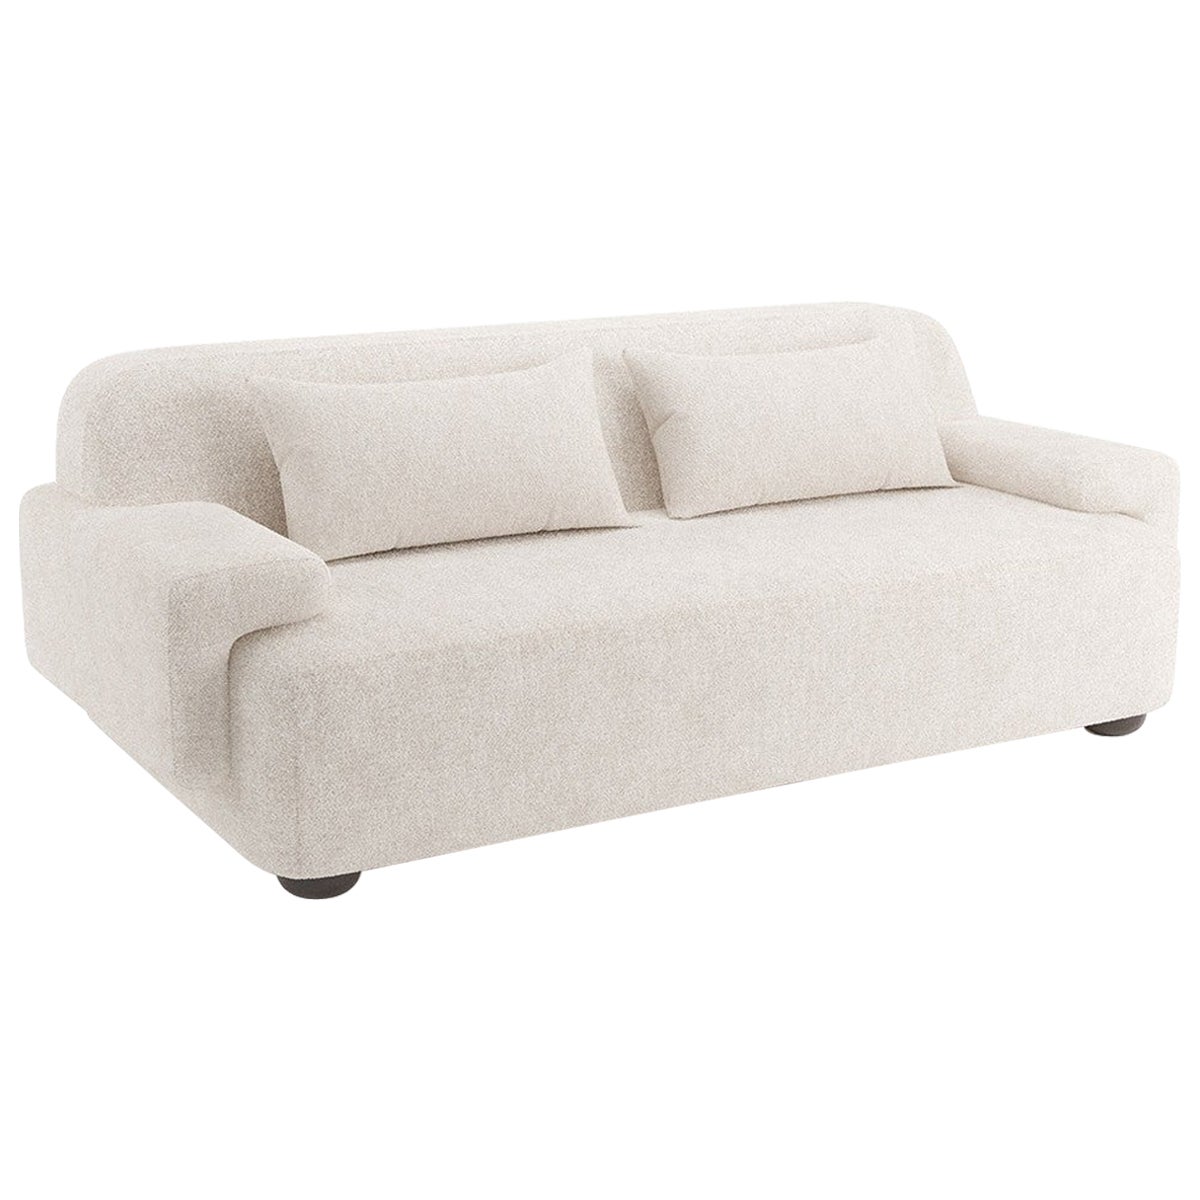 Popus Editions Lena 4 Seater Sofa in Gray Antwerp Linen Upholstery